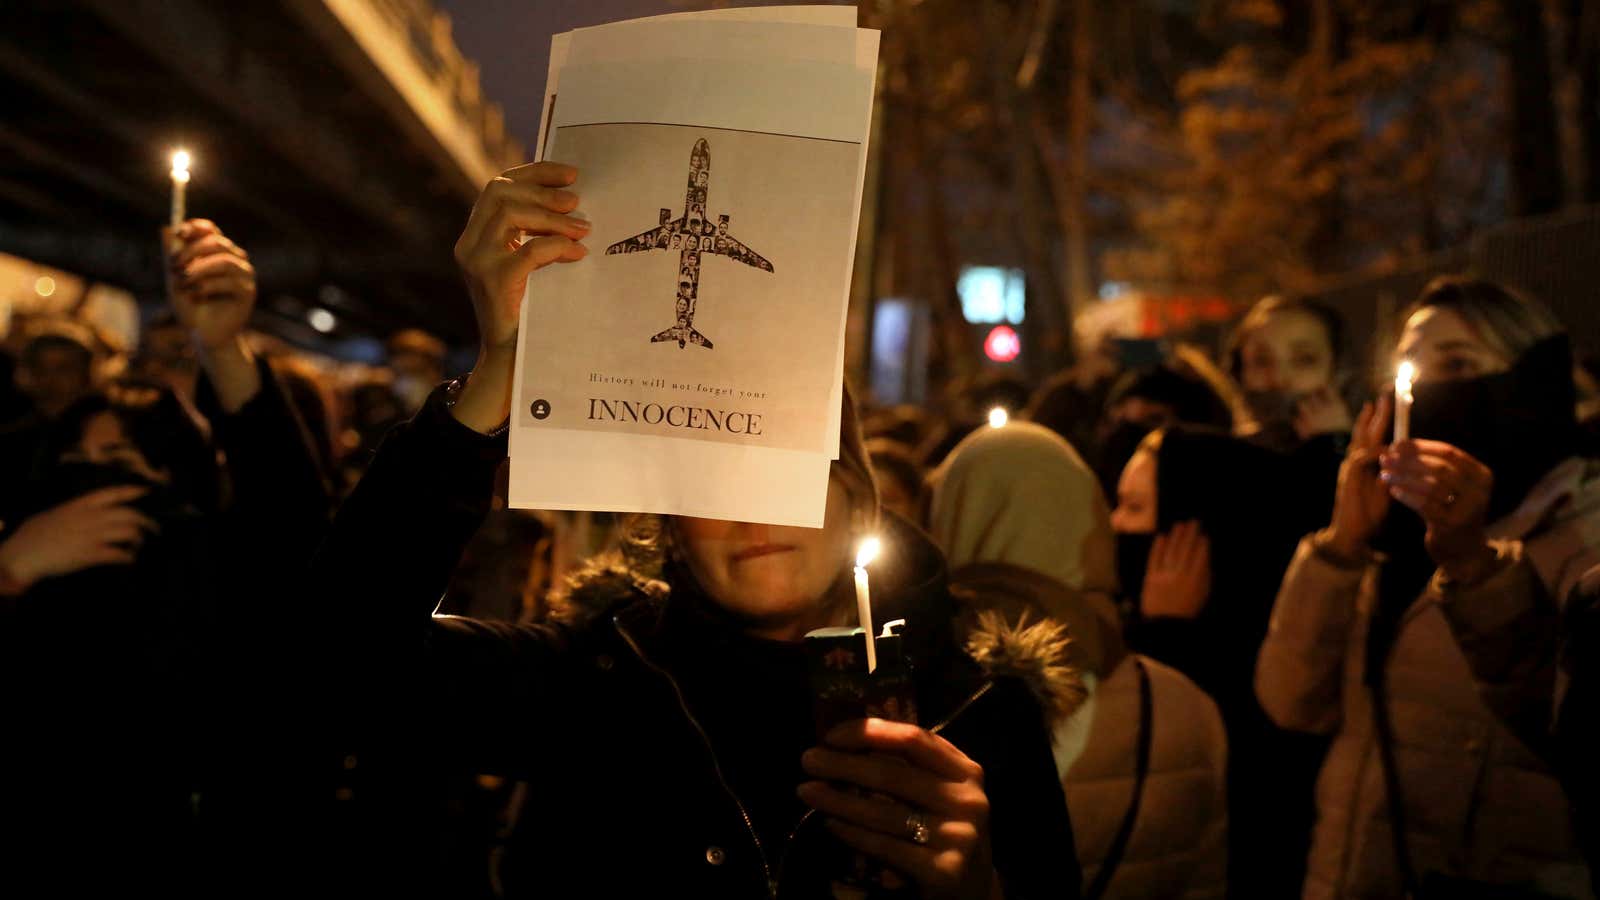 A candlelight vigil for the victims of the Ukraine plane crash at the gate of Amri Kabir University in Tehran.